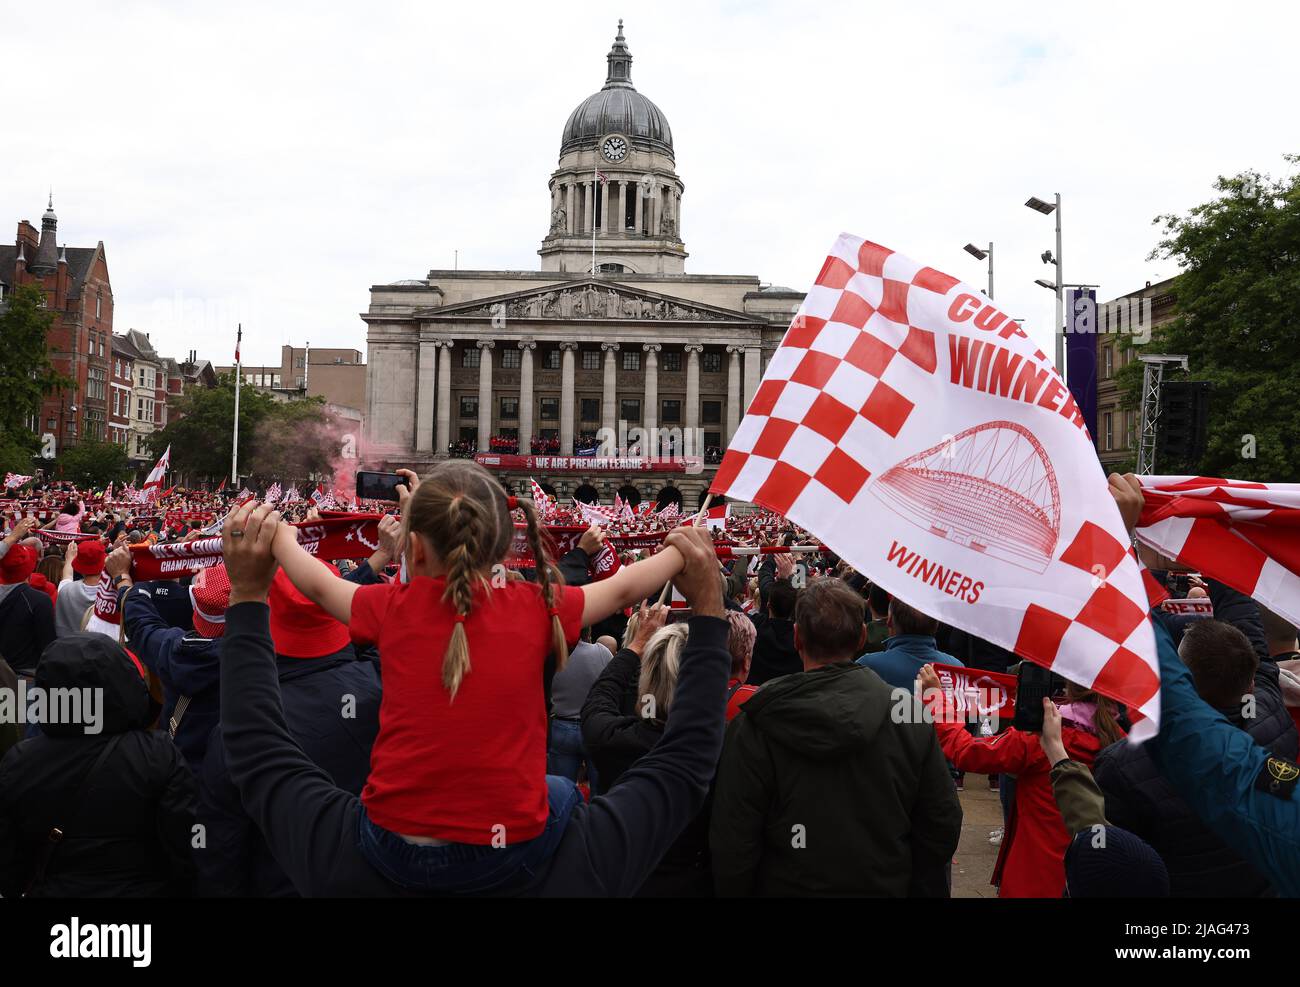 Nottingham, Nottinghamshire, UK. 30th May 2022. Fana watch the Nottingham Forest soccer team celebrate their promotion to the Premier League on the balcony of the Council Building. Credit Darren Staples/Alamy Live News. Stock Photo